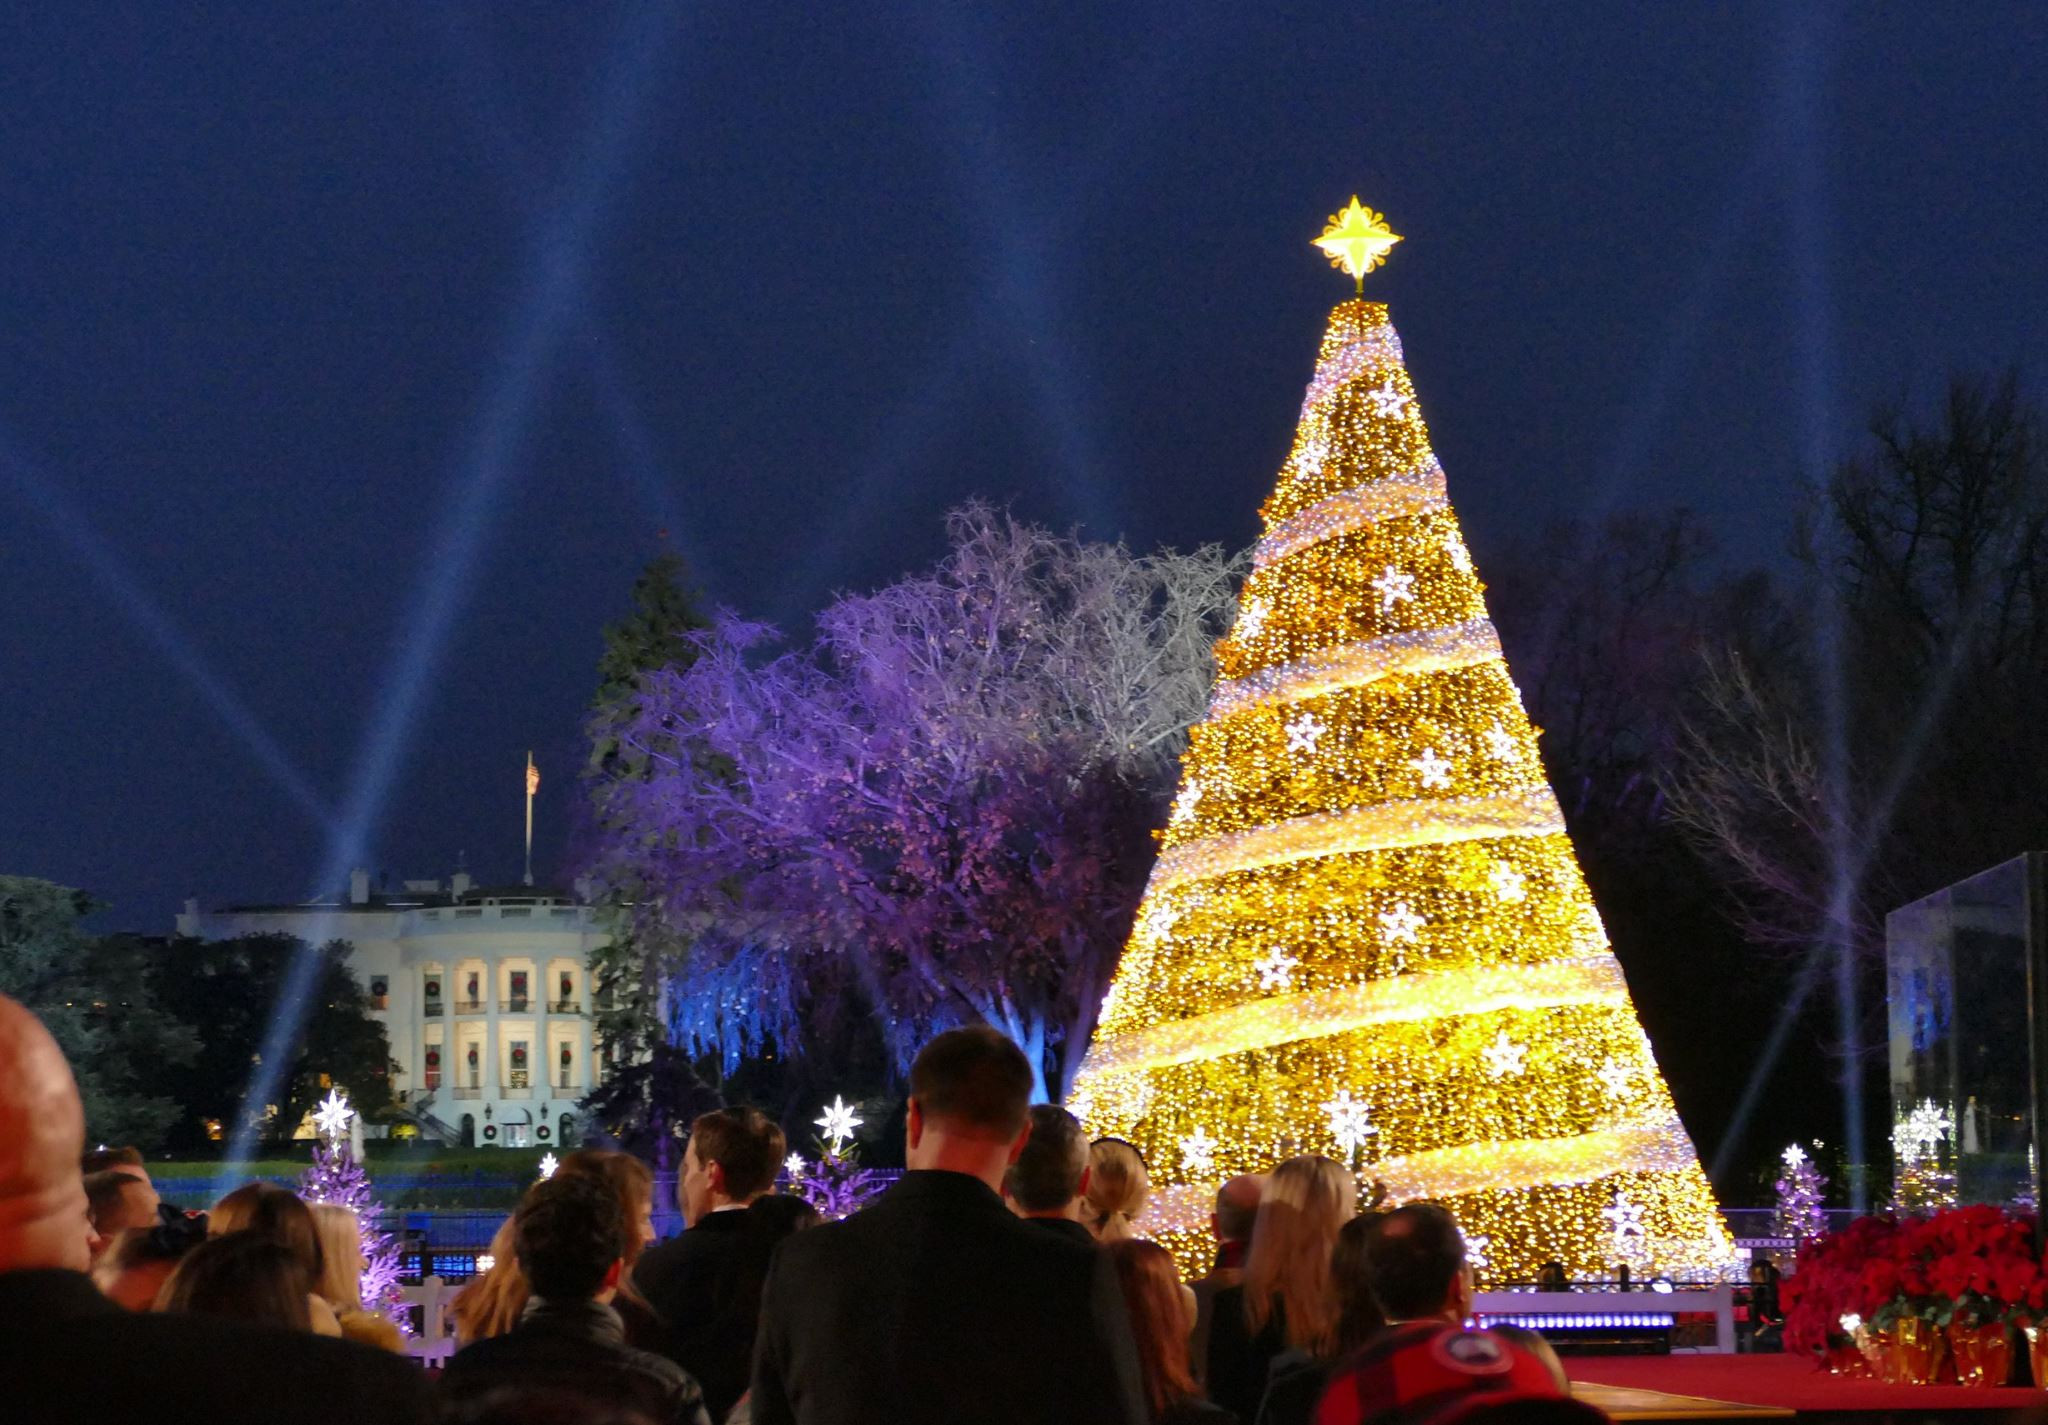 White House Christmas Tree Lighting
 Celebrate Holiday Traditions at the 2018 National